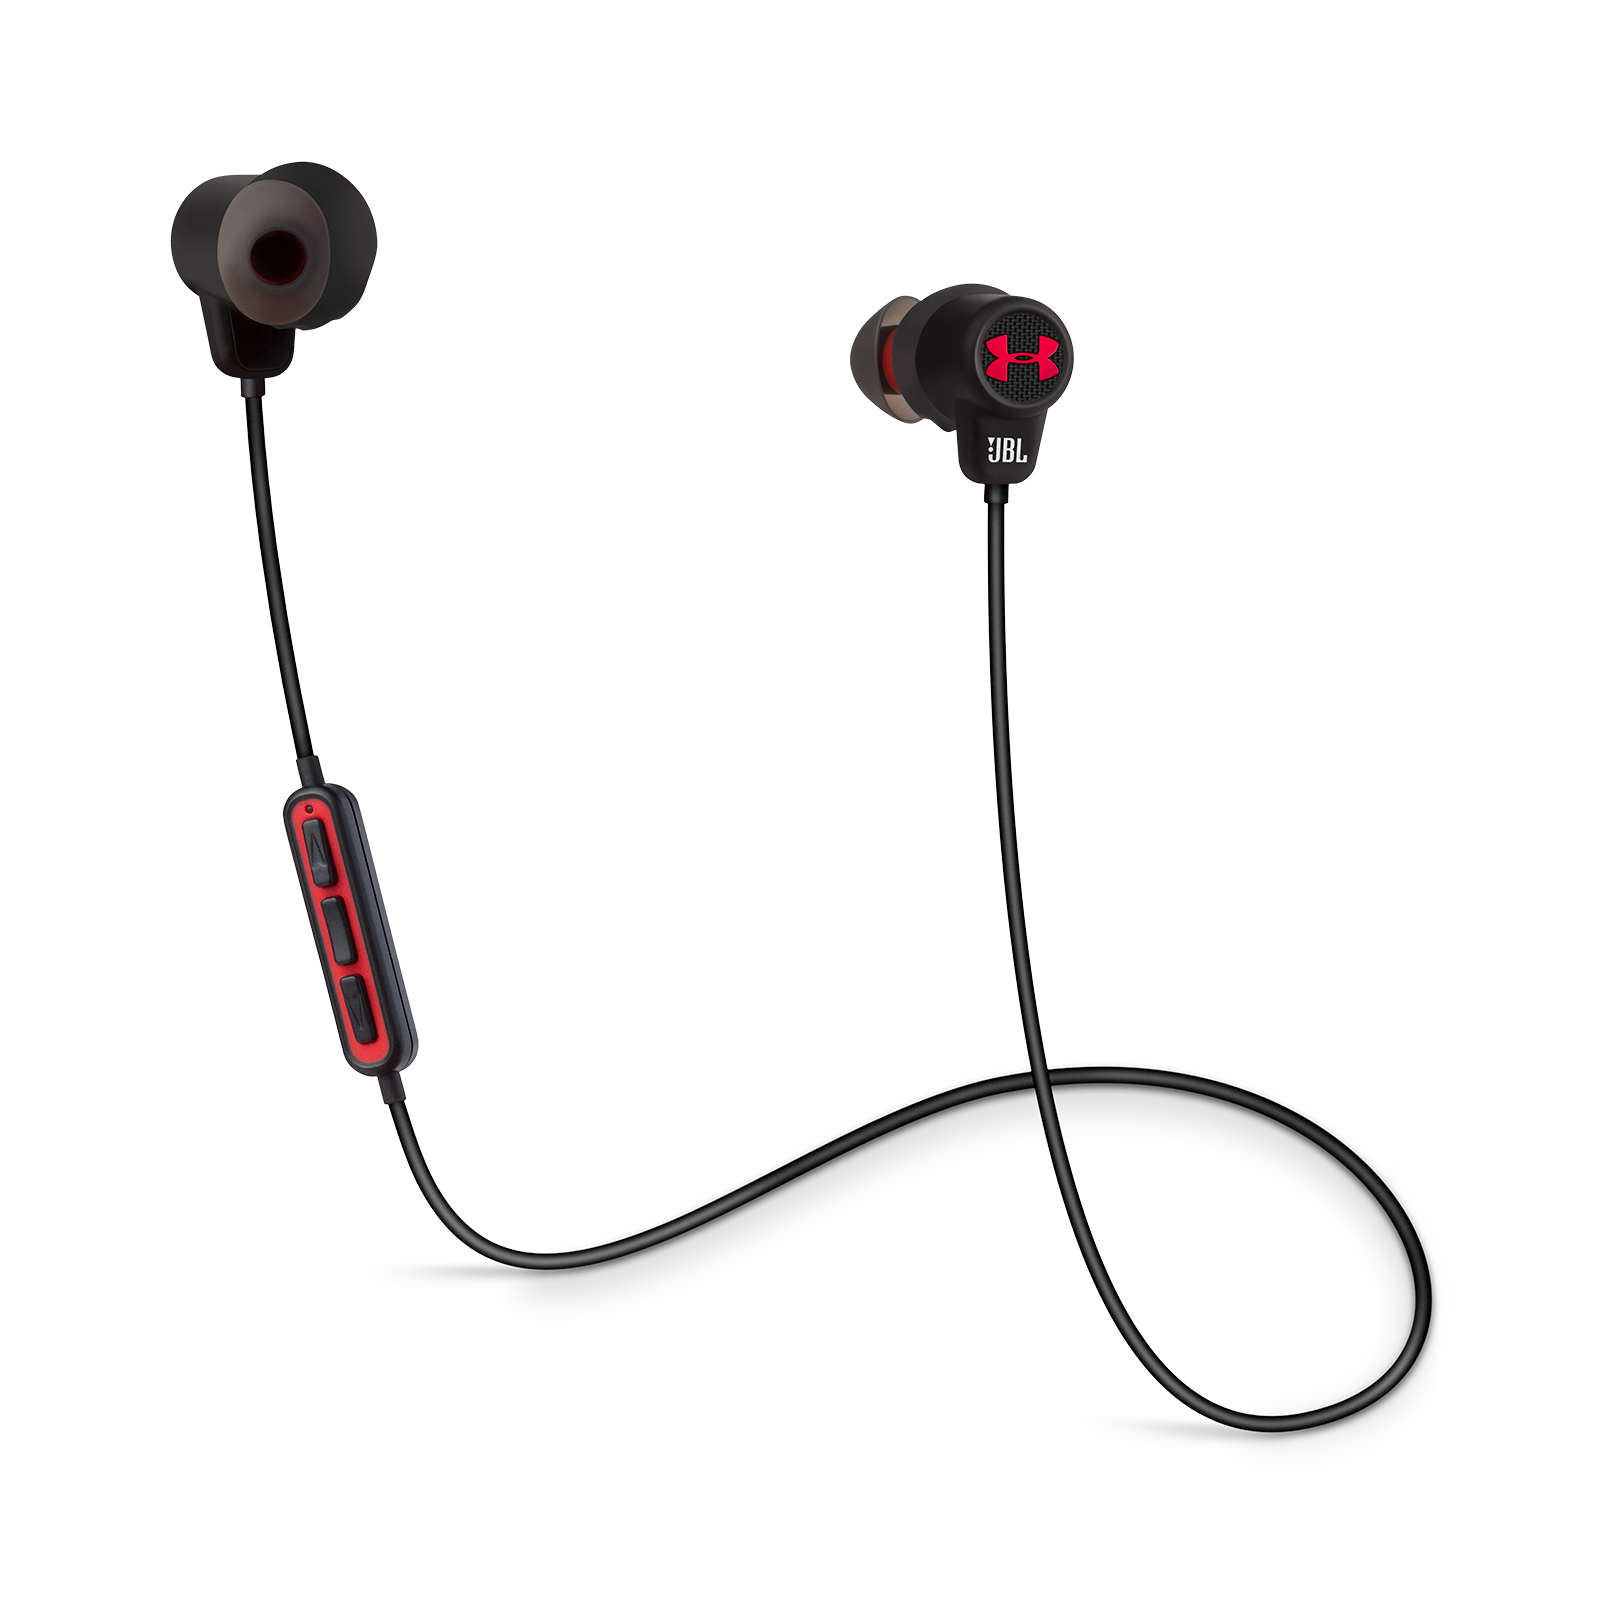 Save $125 on Under Armour Sport Wireless. Wireless In-Ear Headphones for Athletes. Sale price $24.99 with coupon code UA2018. Shop now.